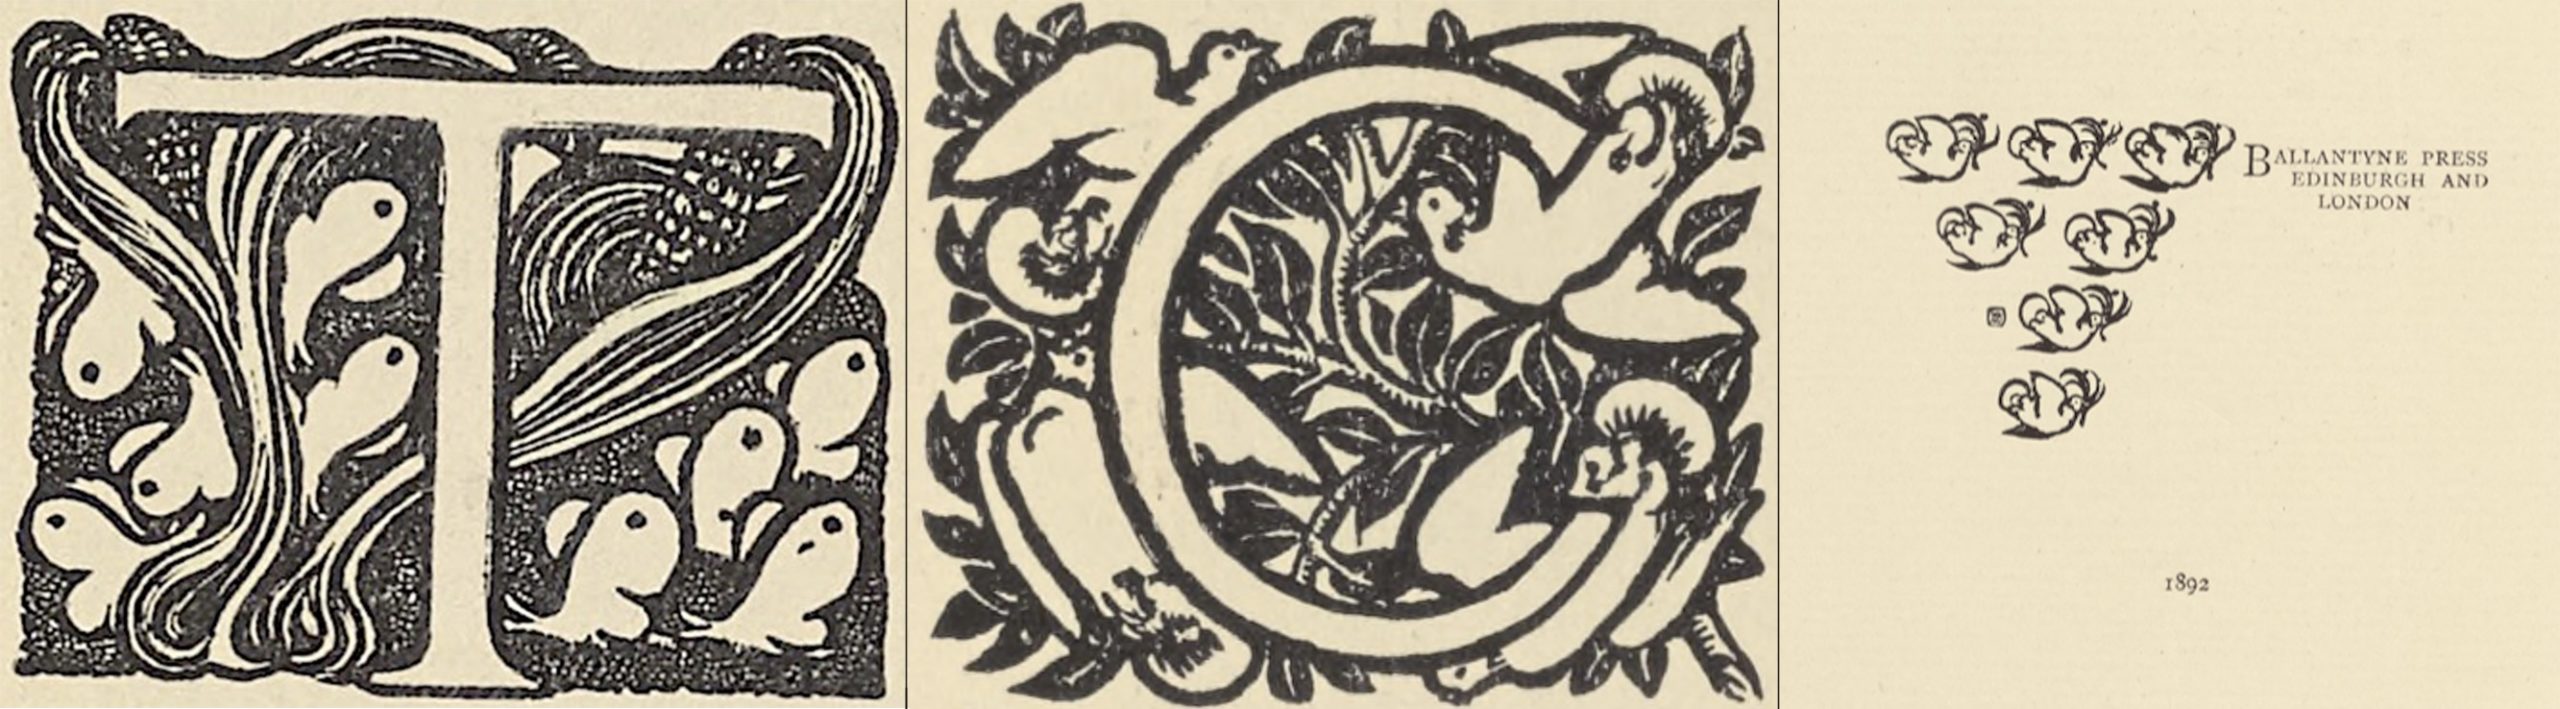 Figure 7. Two of Charles Ricketts’s illuminated initials for Volume 2                        and the Ballantyne Press Colophon